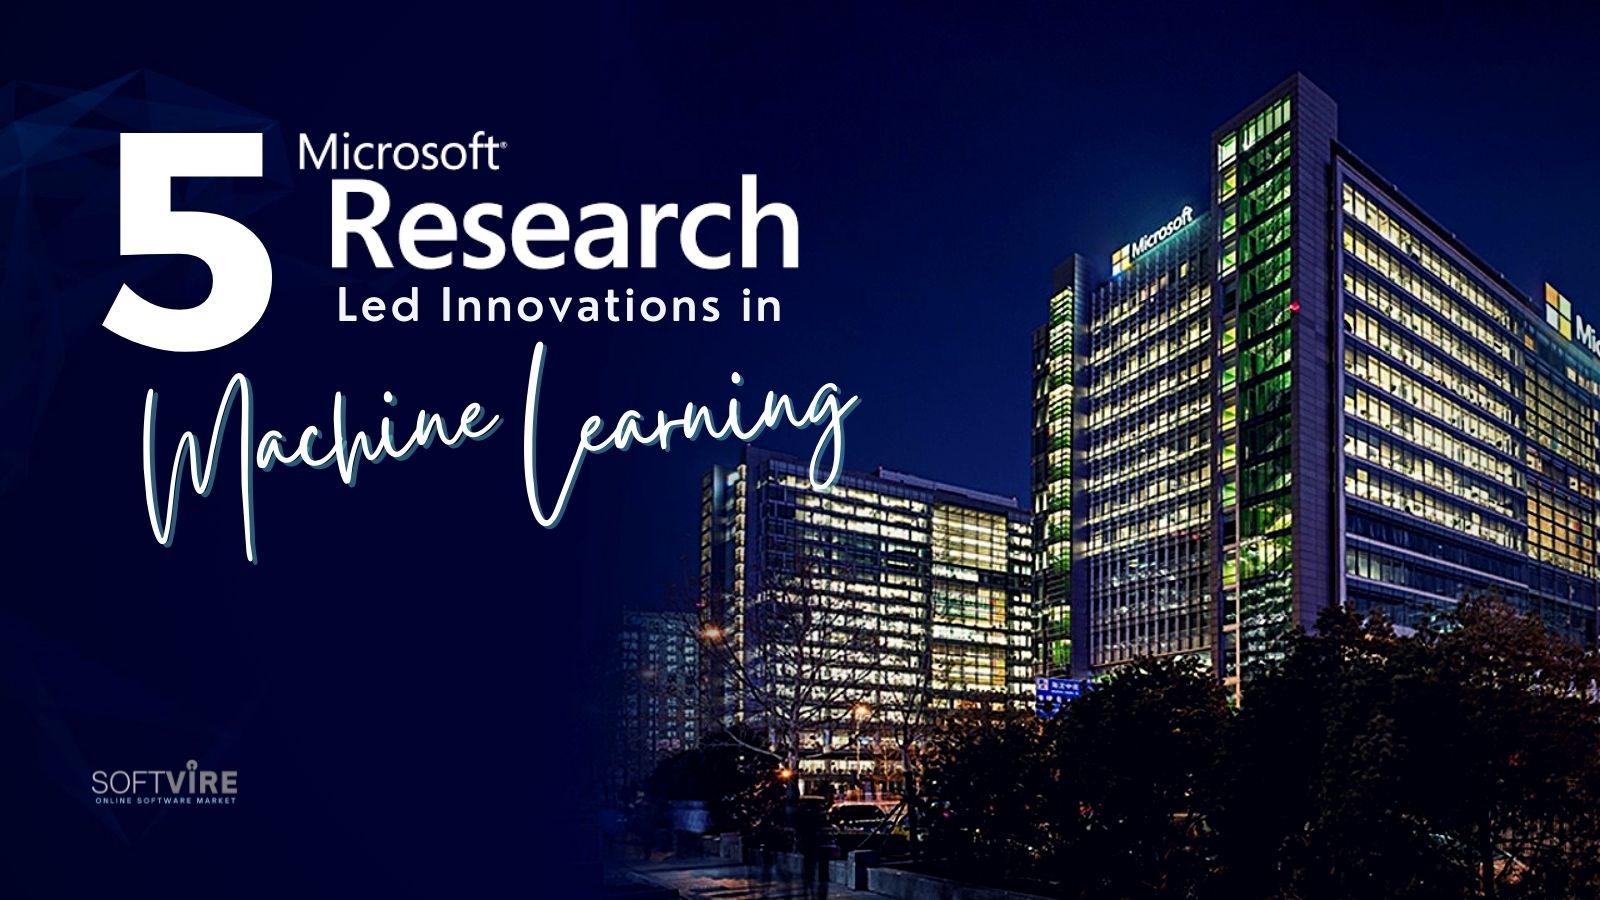 5 Microsoft Research Led Innovation in Machine Learning - Twitter - Softvire Global Market